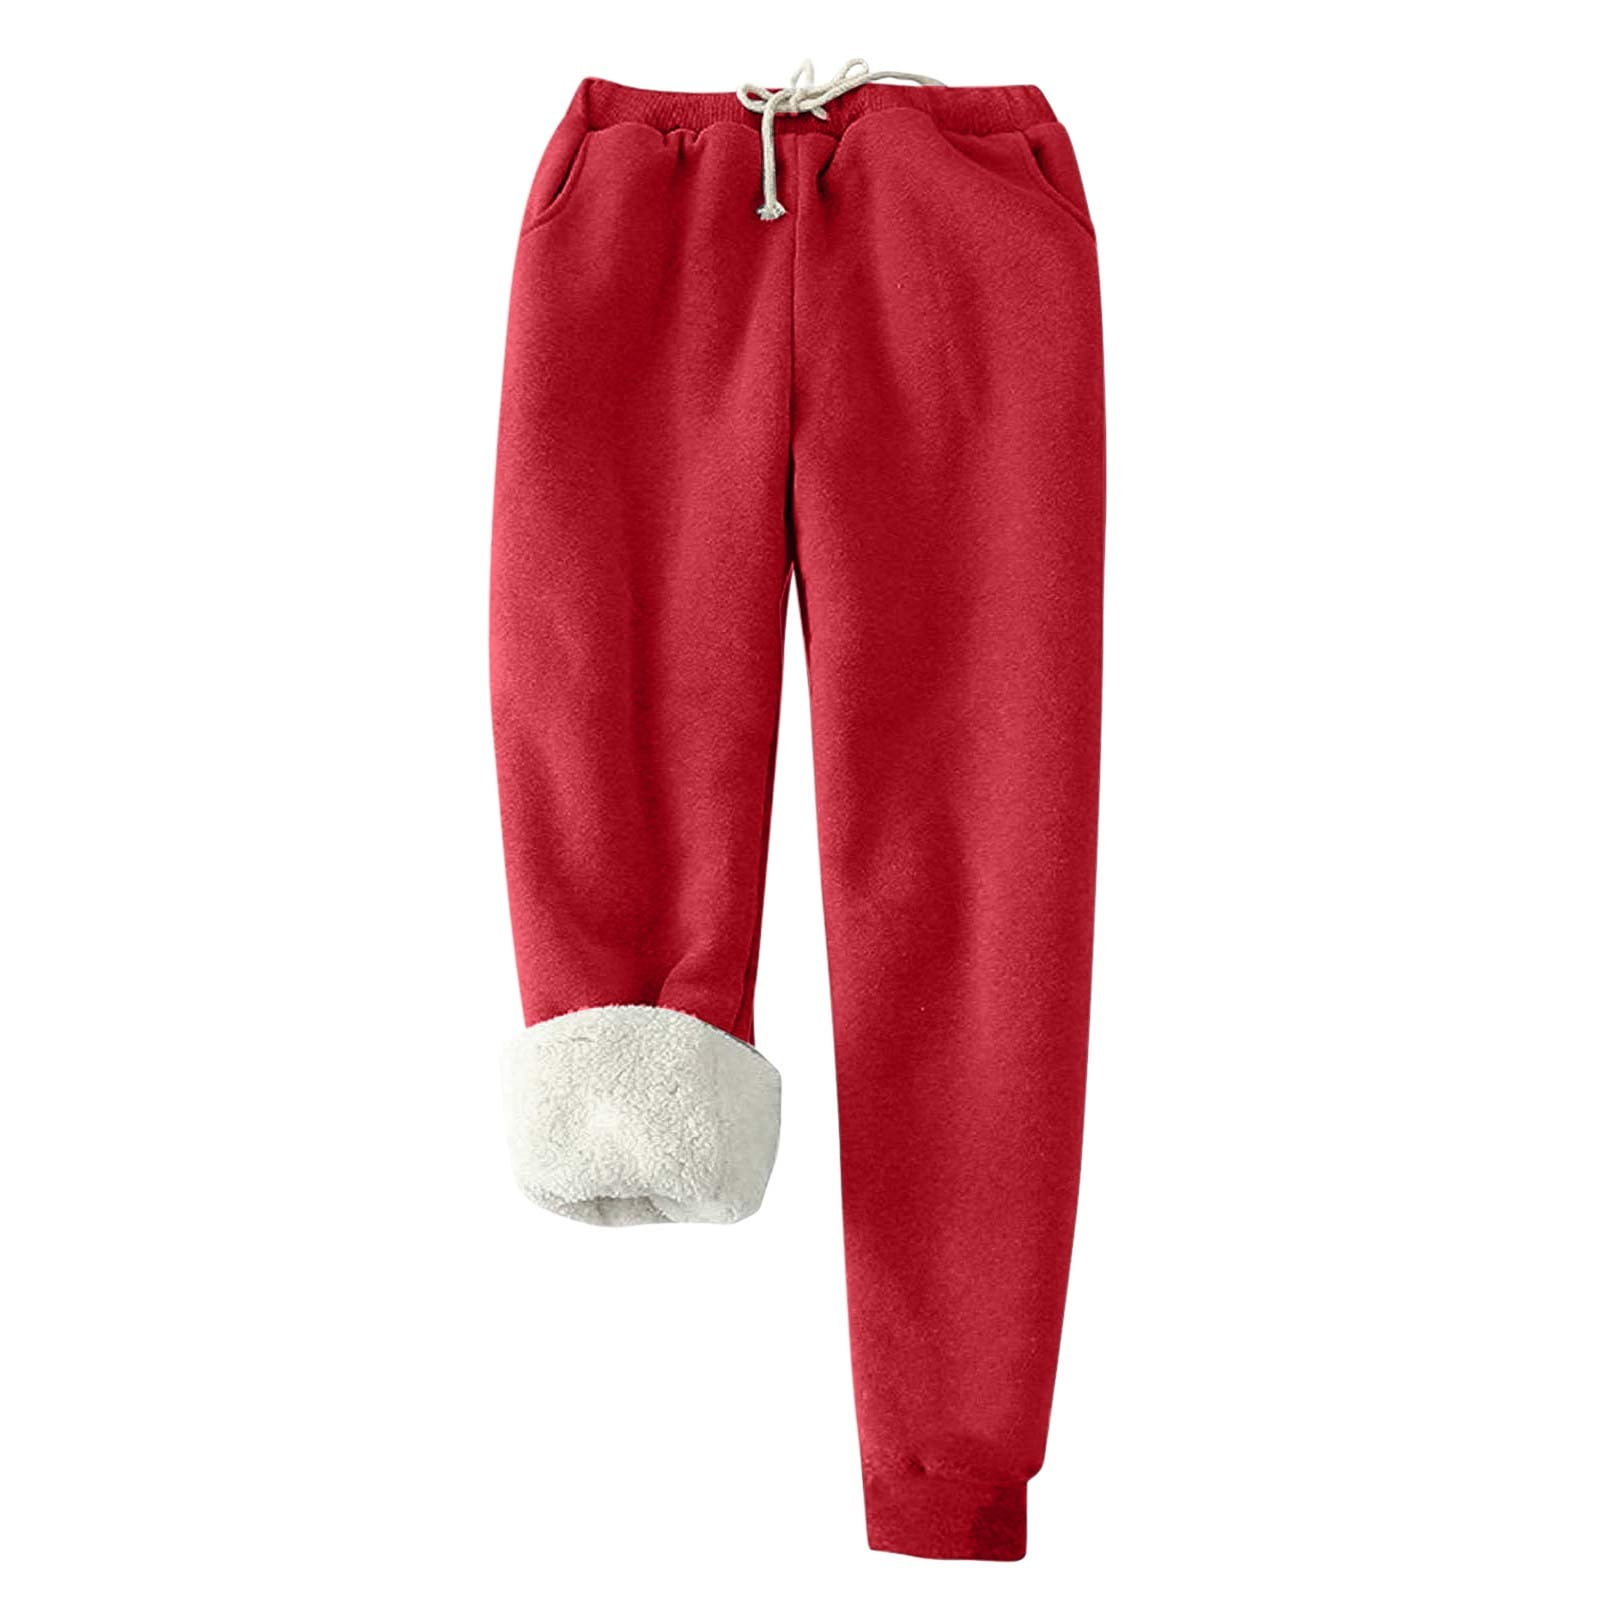 Luxalzxs Womens Sweatpants Sherpa Lined Sweatpants Winter Athletic ...